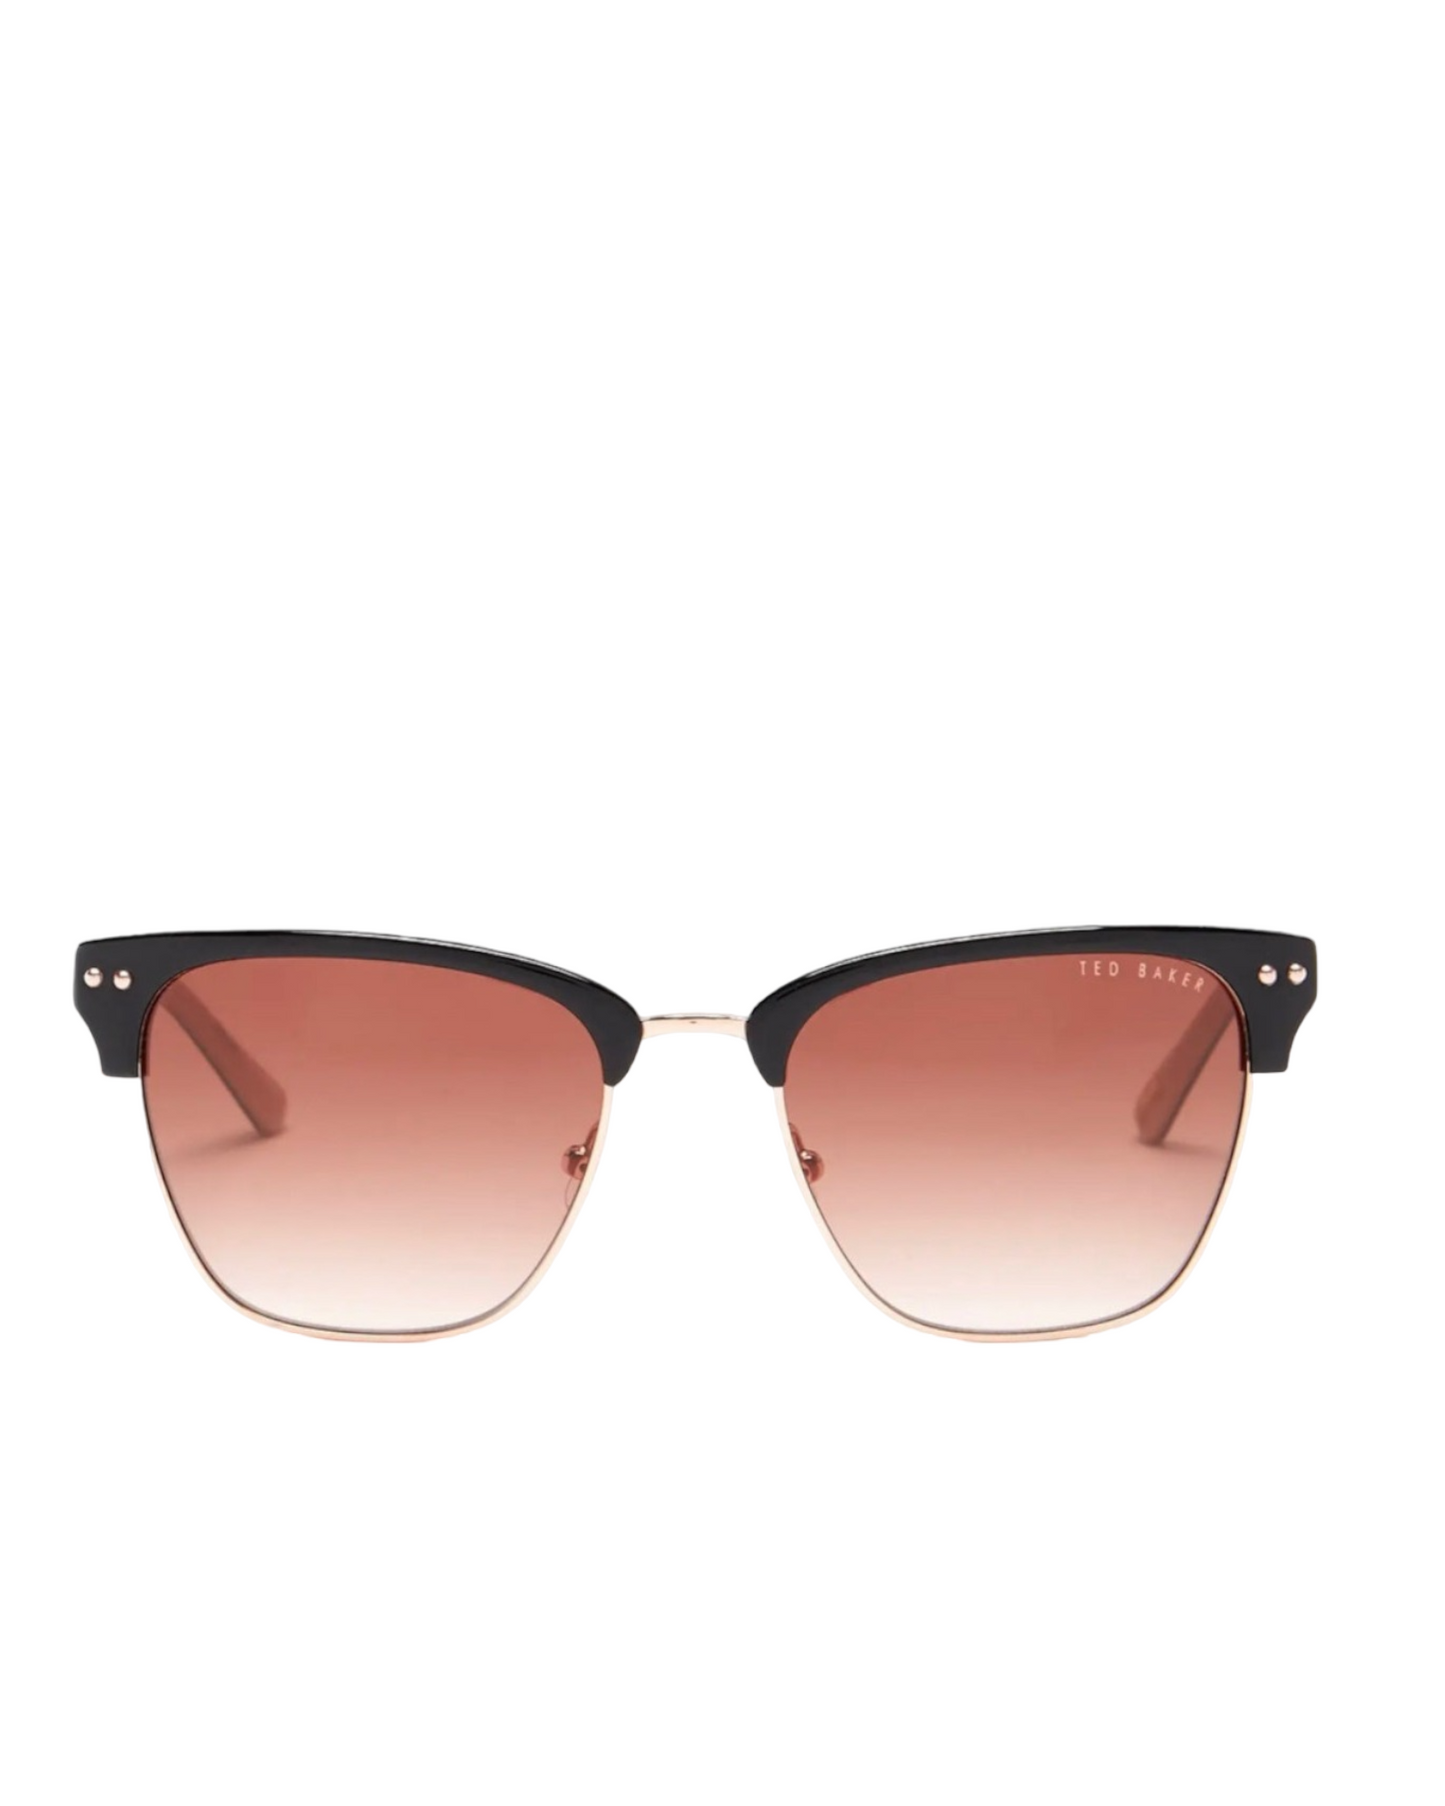 Ted Baker 52mm Clubmaster Sunglasses